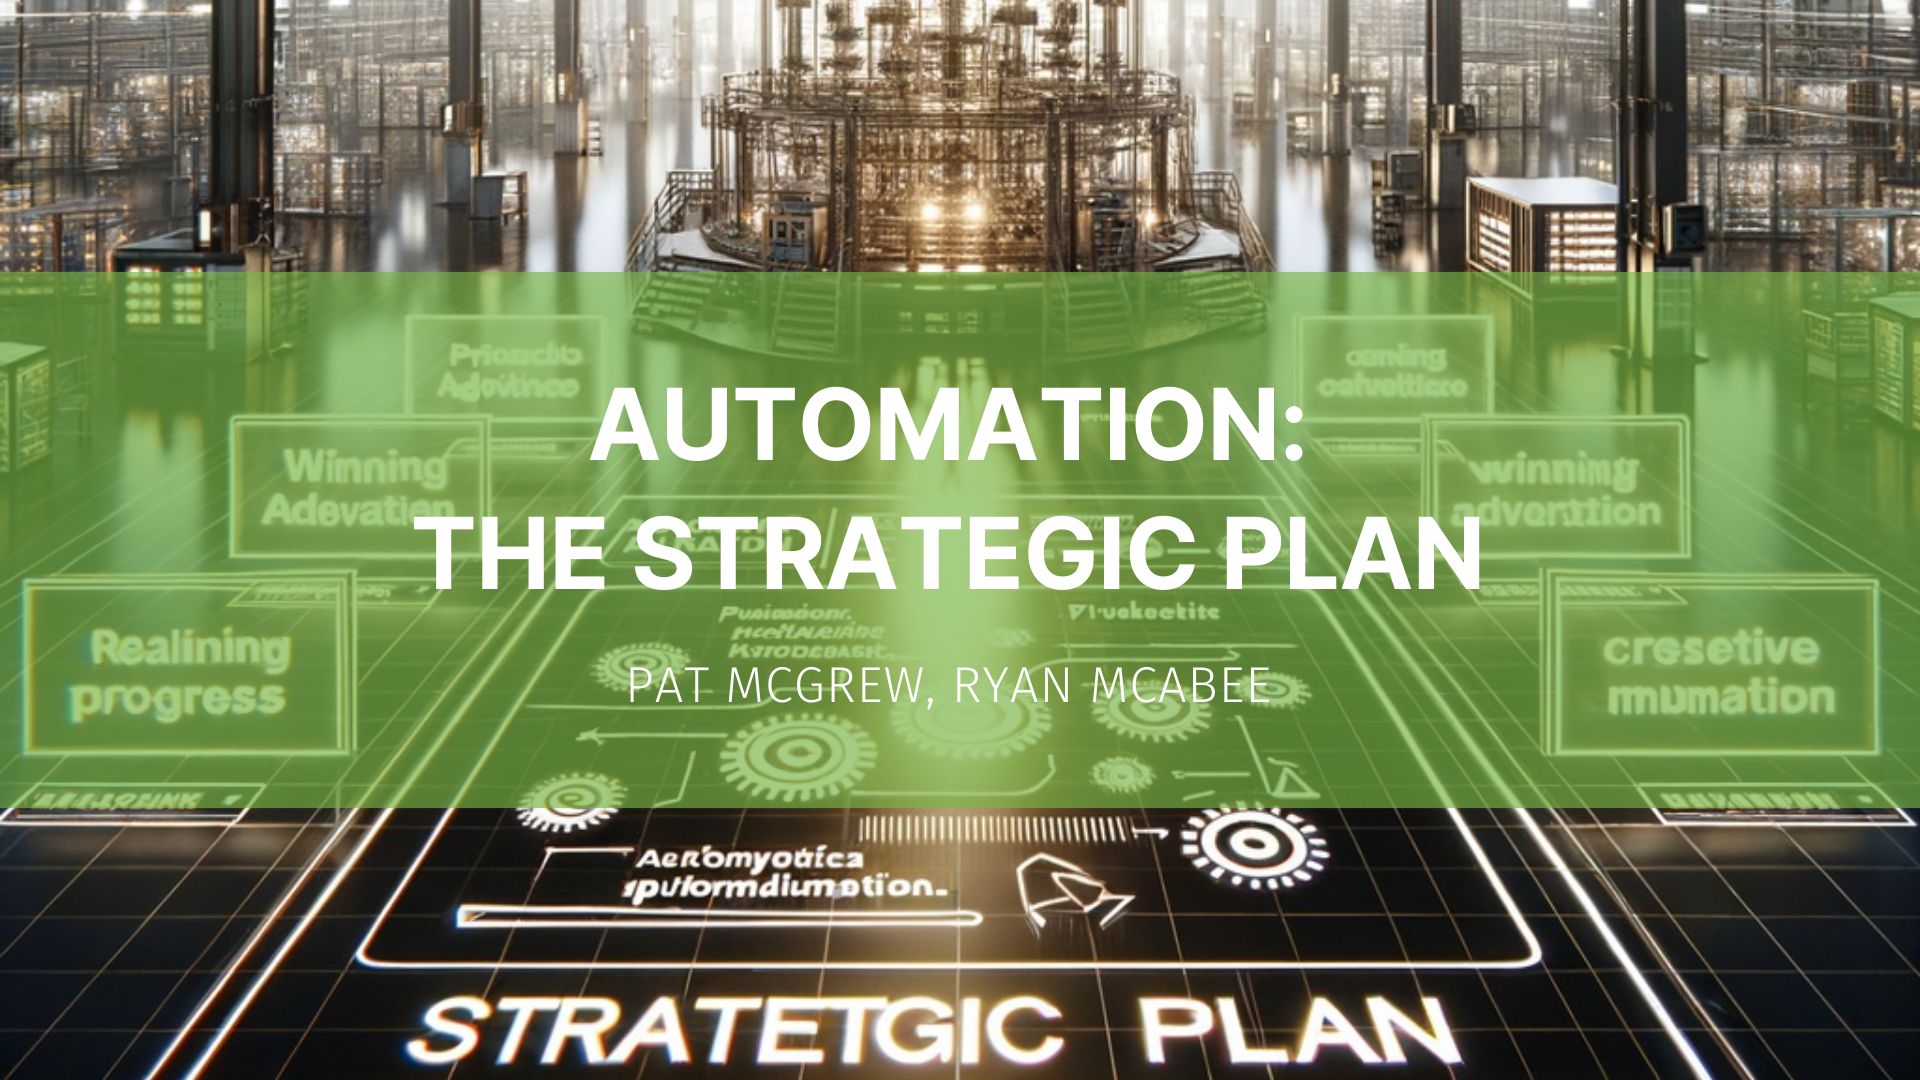 Featured image for “Automation: The Strategic Plan”